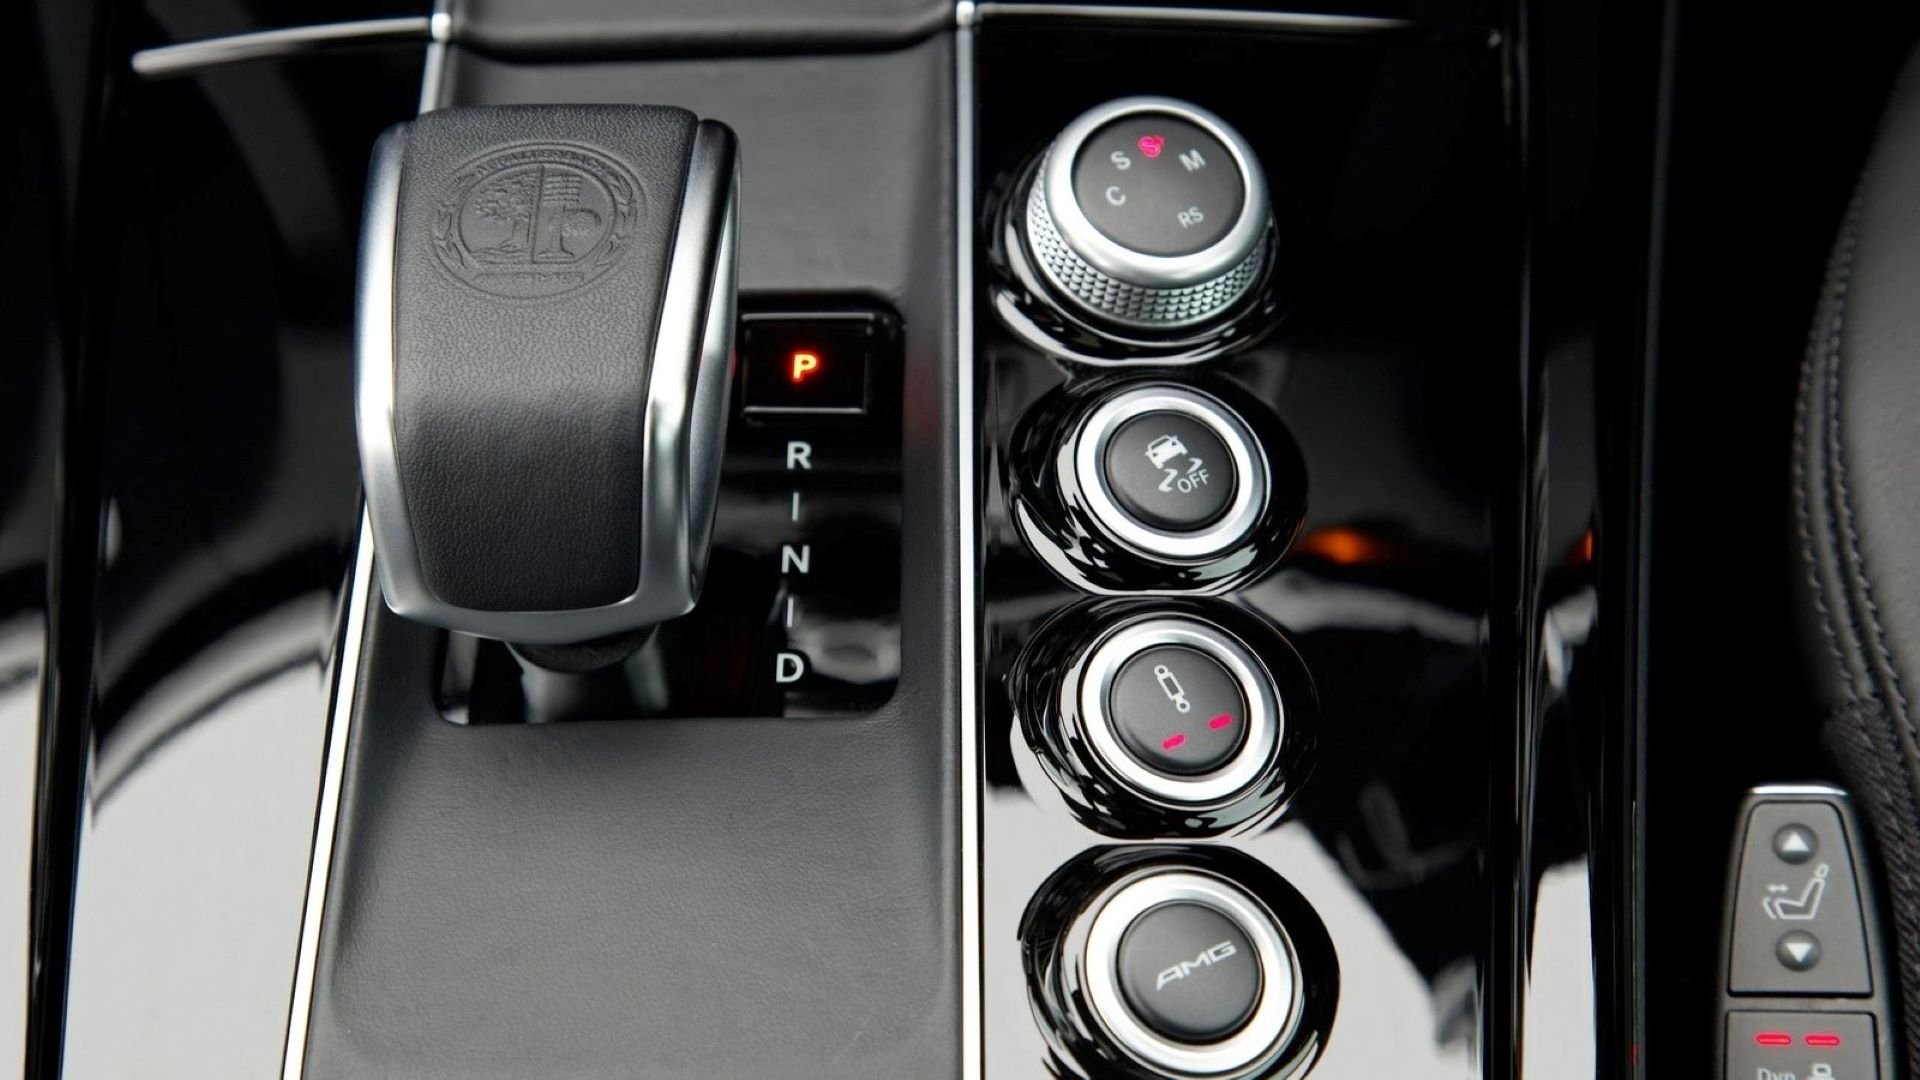 The Definitive Guide to the Mercedes 722.9 7G-Tronic Transmission